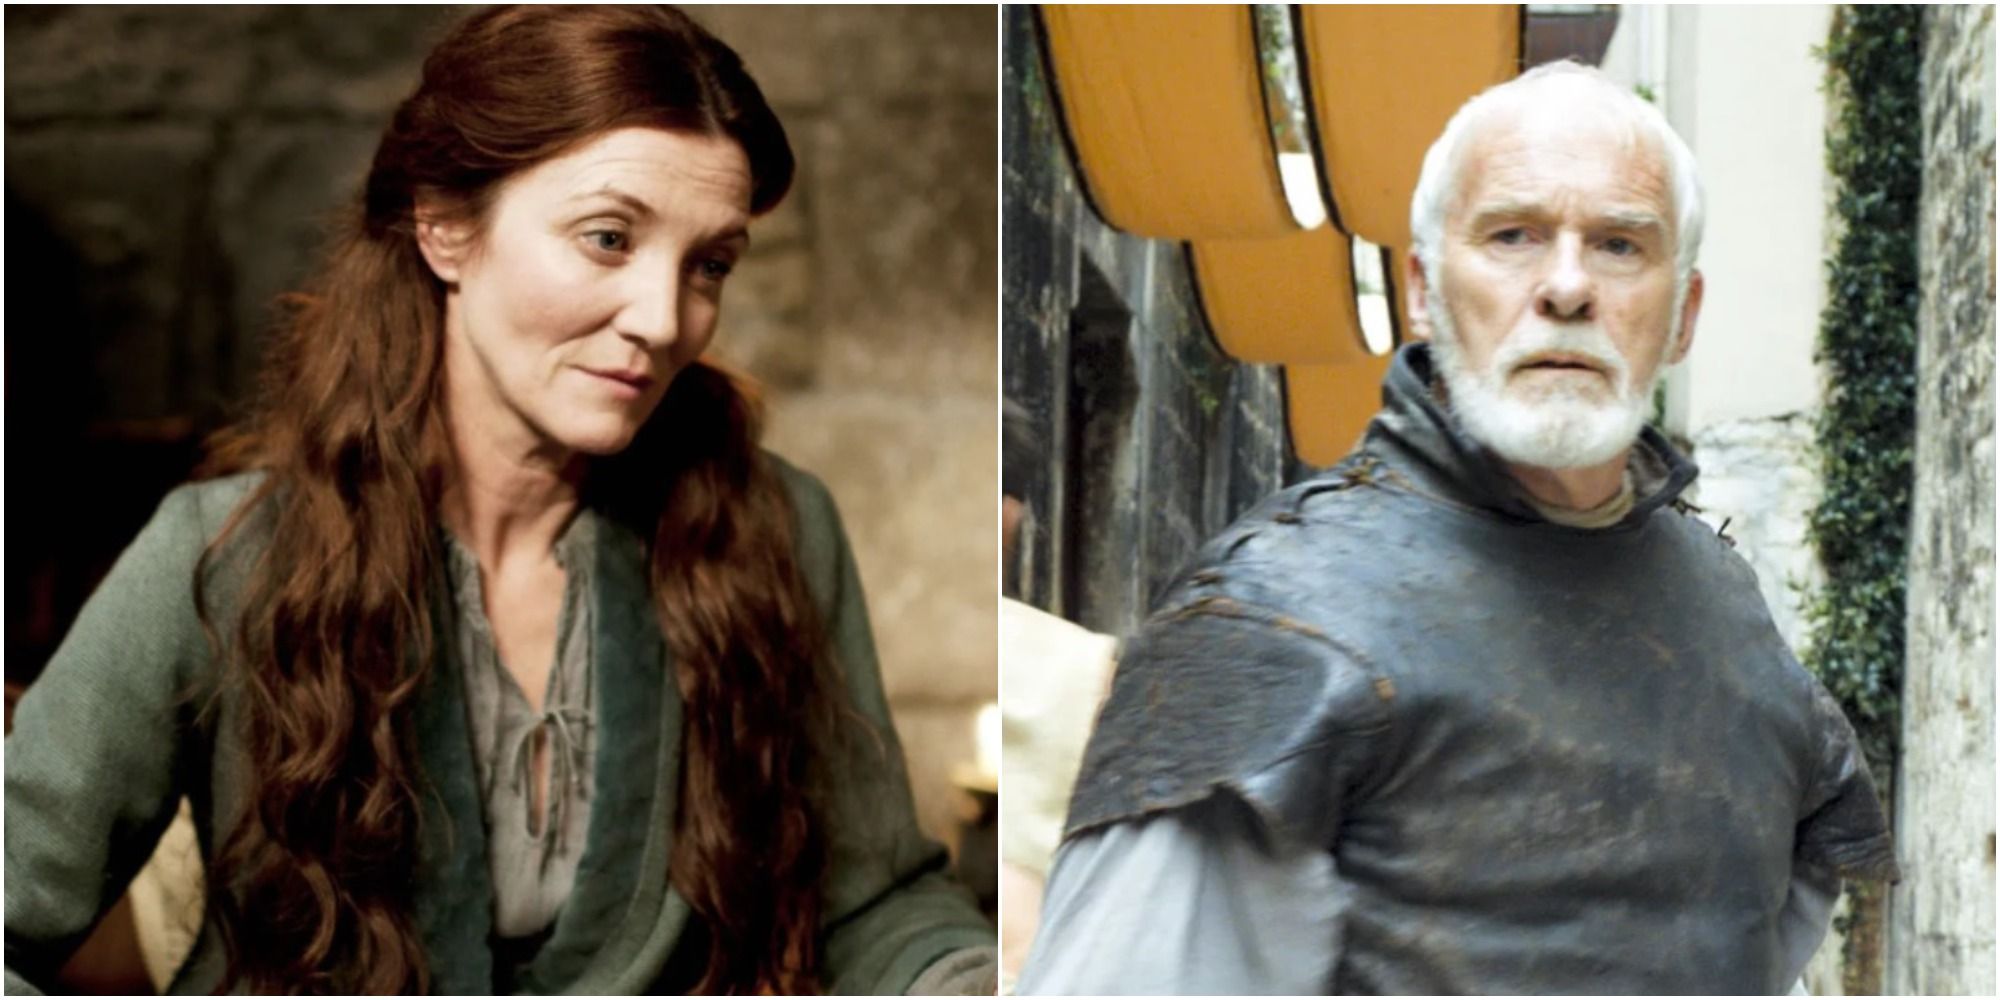 Catelyn and Barristan in GoT